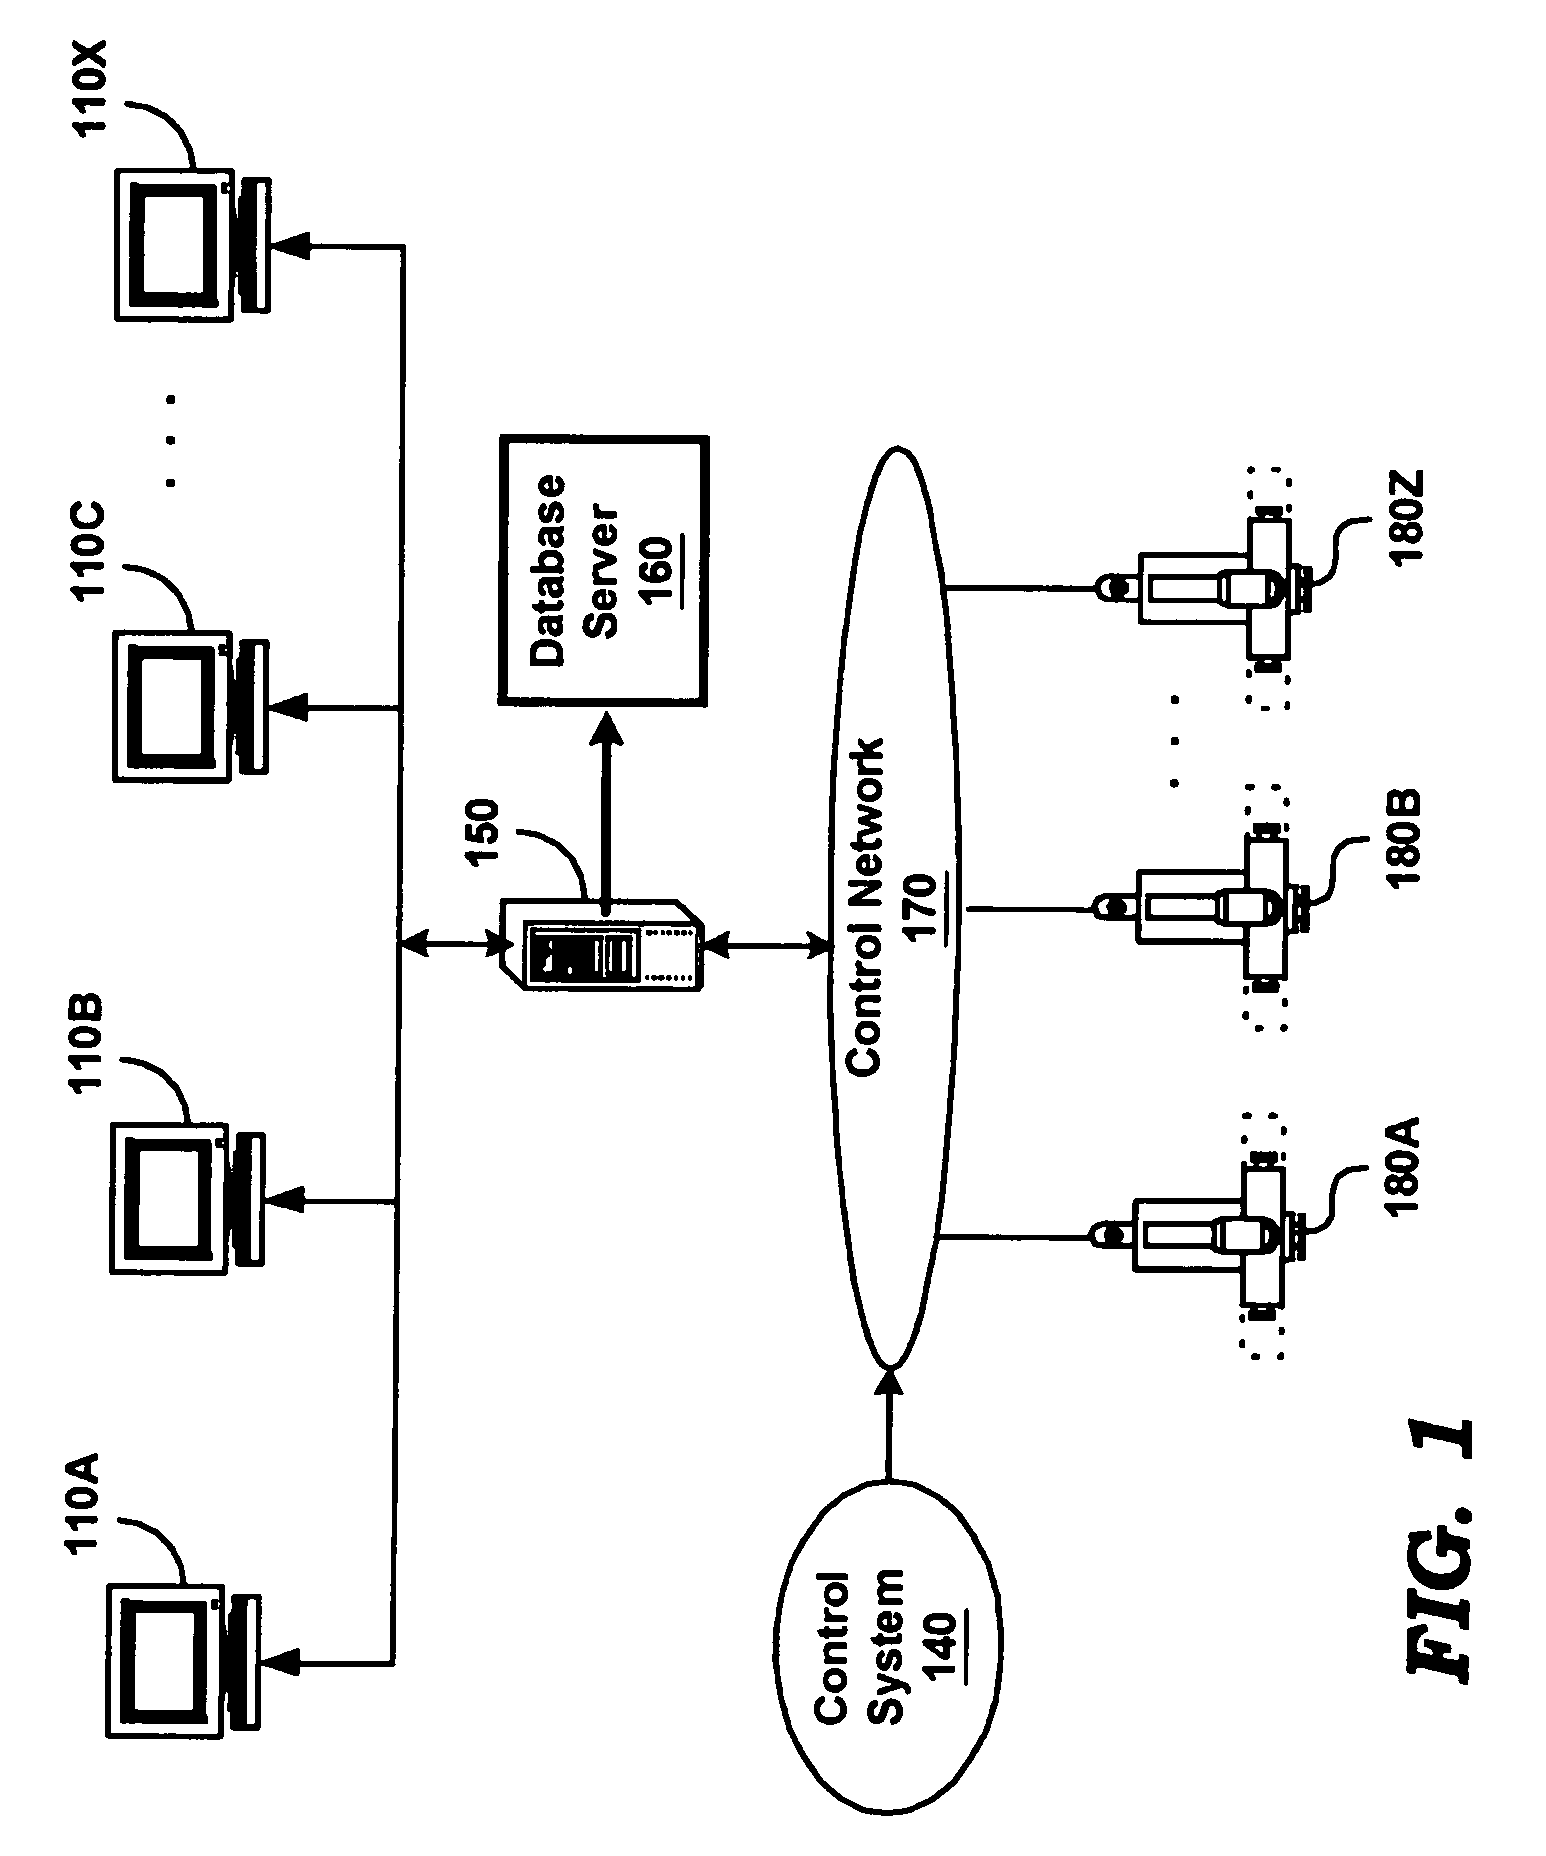 Managing field devices having different device description specifications in a process control system